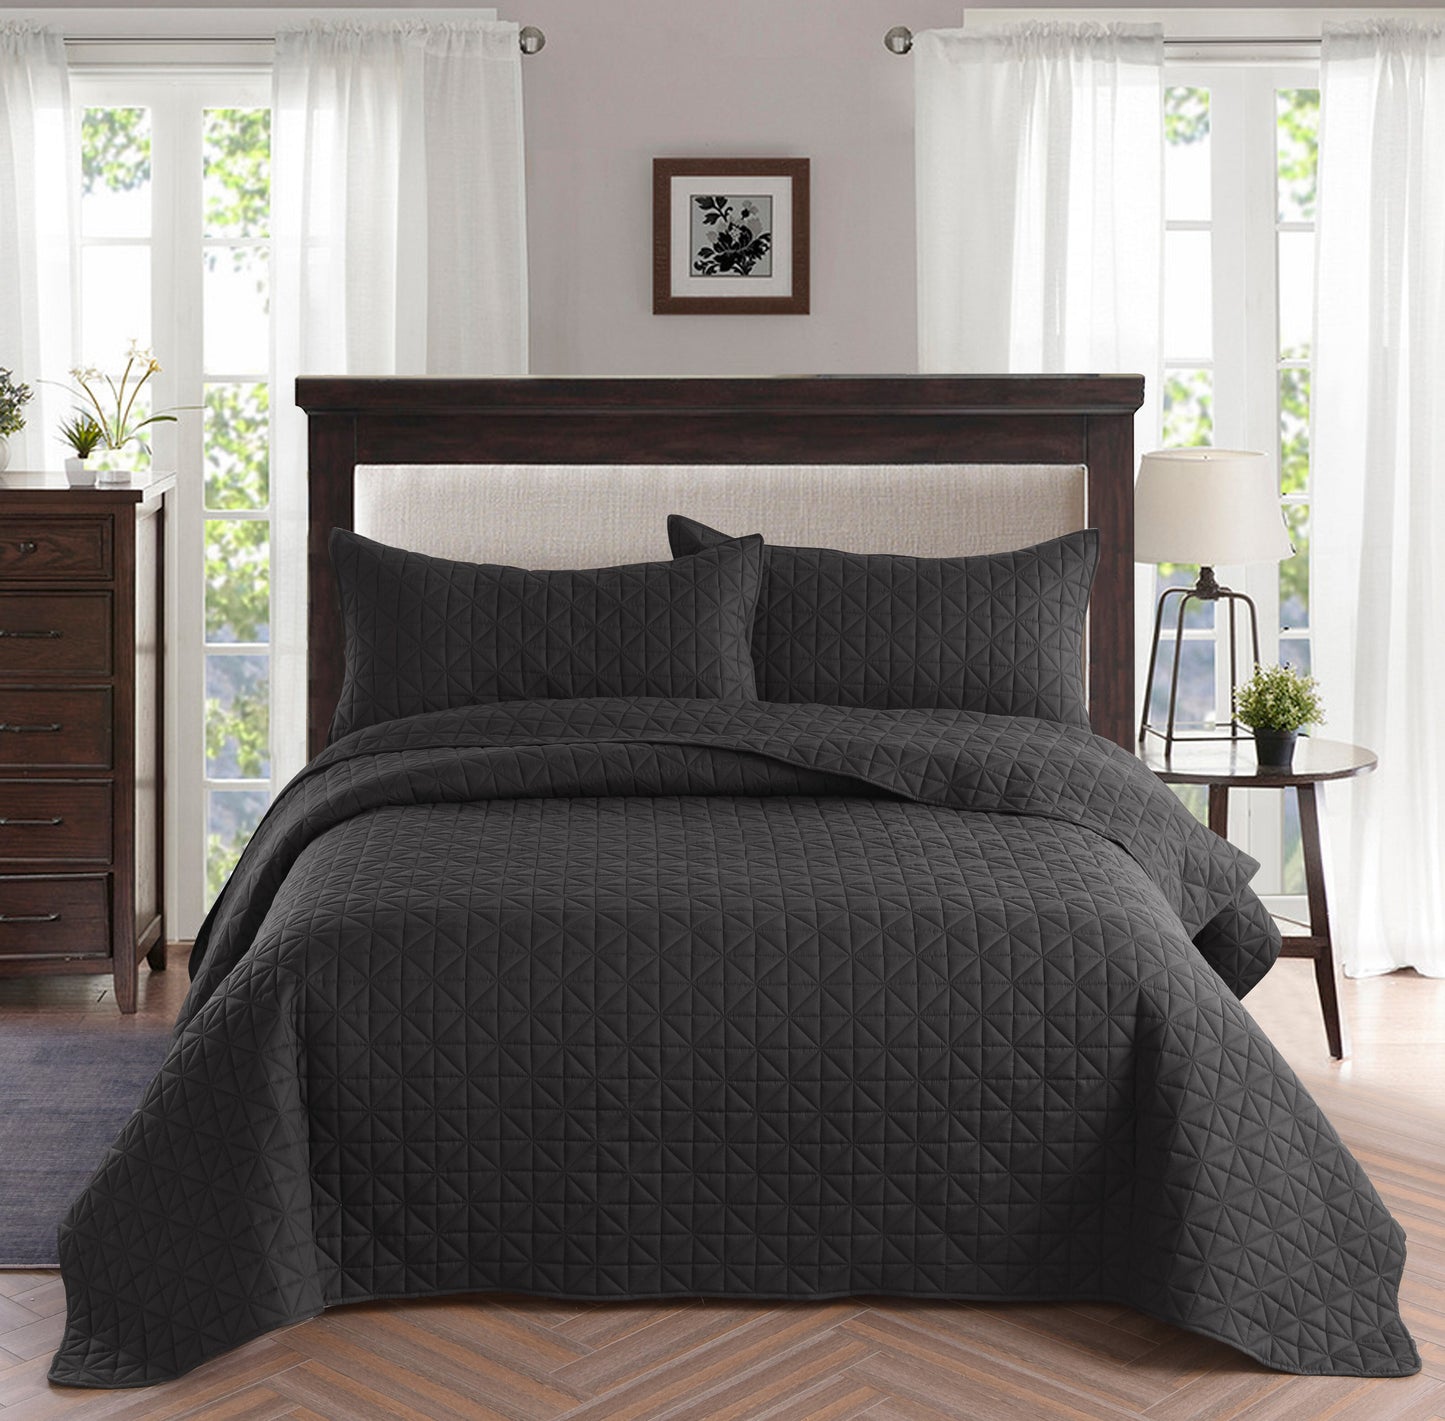 Exclusivo Mezcla 3-Piece King/Queen/Full/Twin Size Quilt Set with Pillow Shams, Grid Quilted Bedspread/Coverlet/Bed Cover -Soft, Lightweight and Reversible